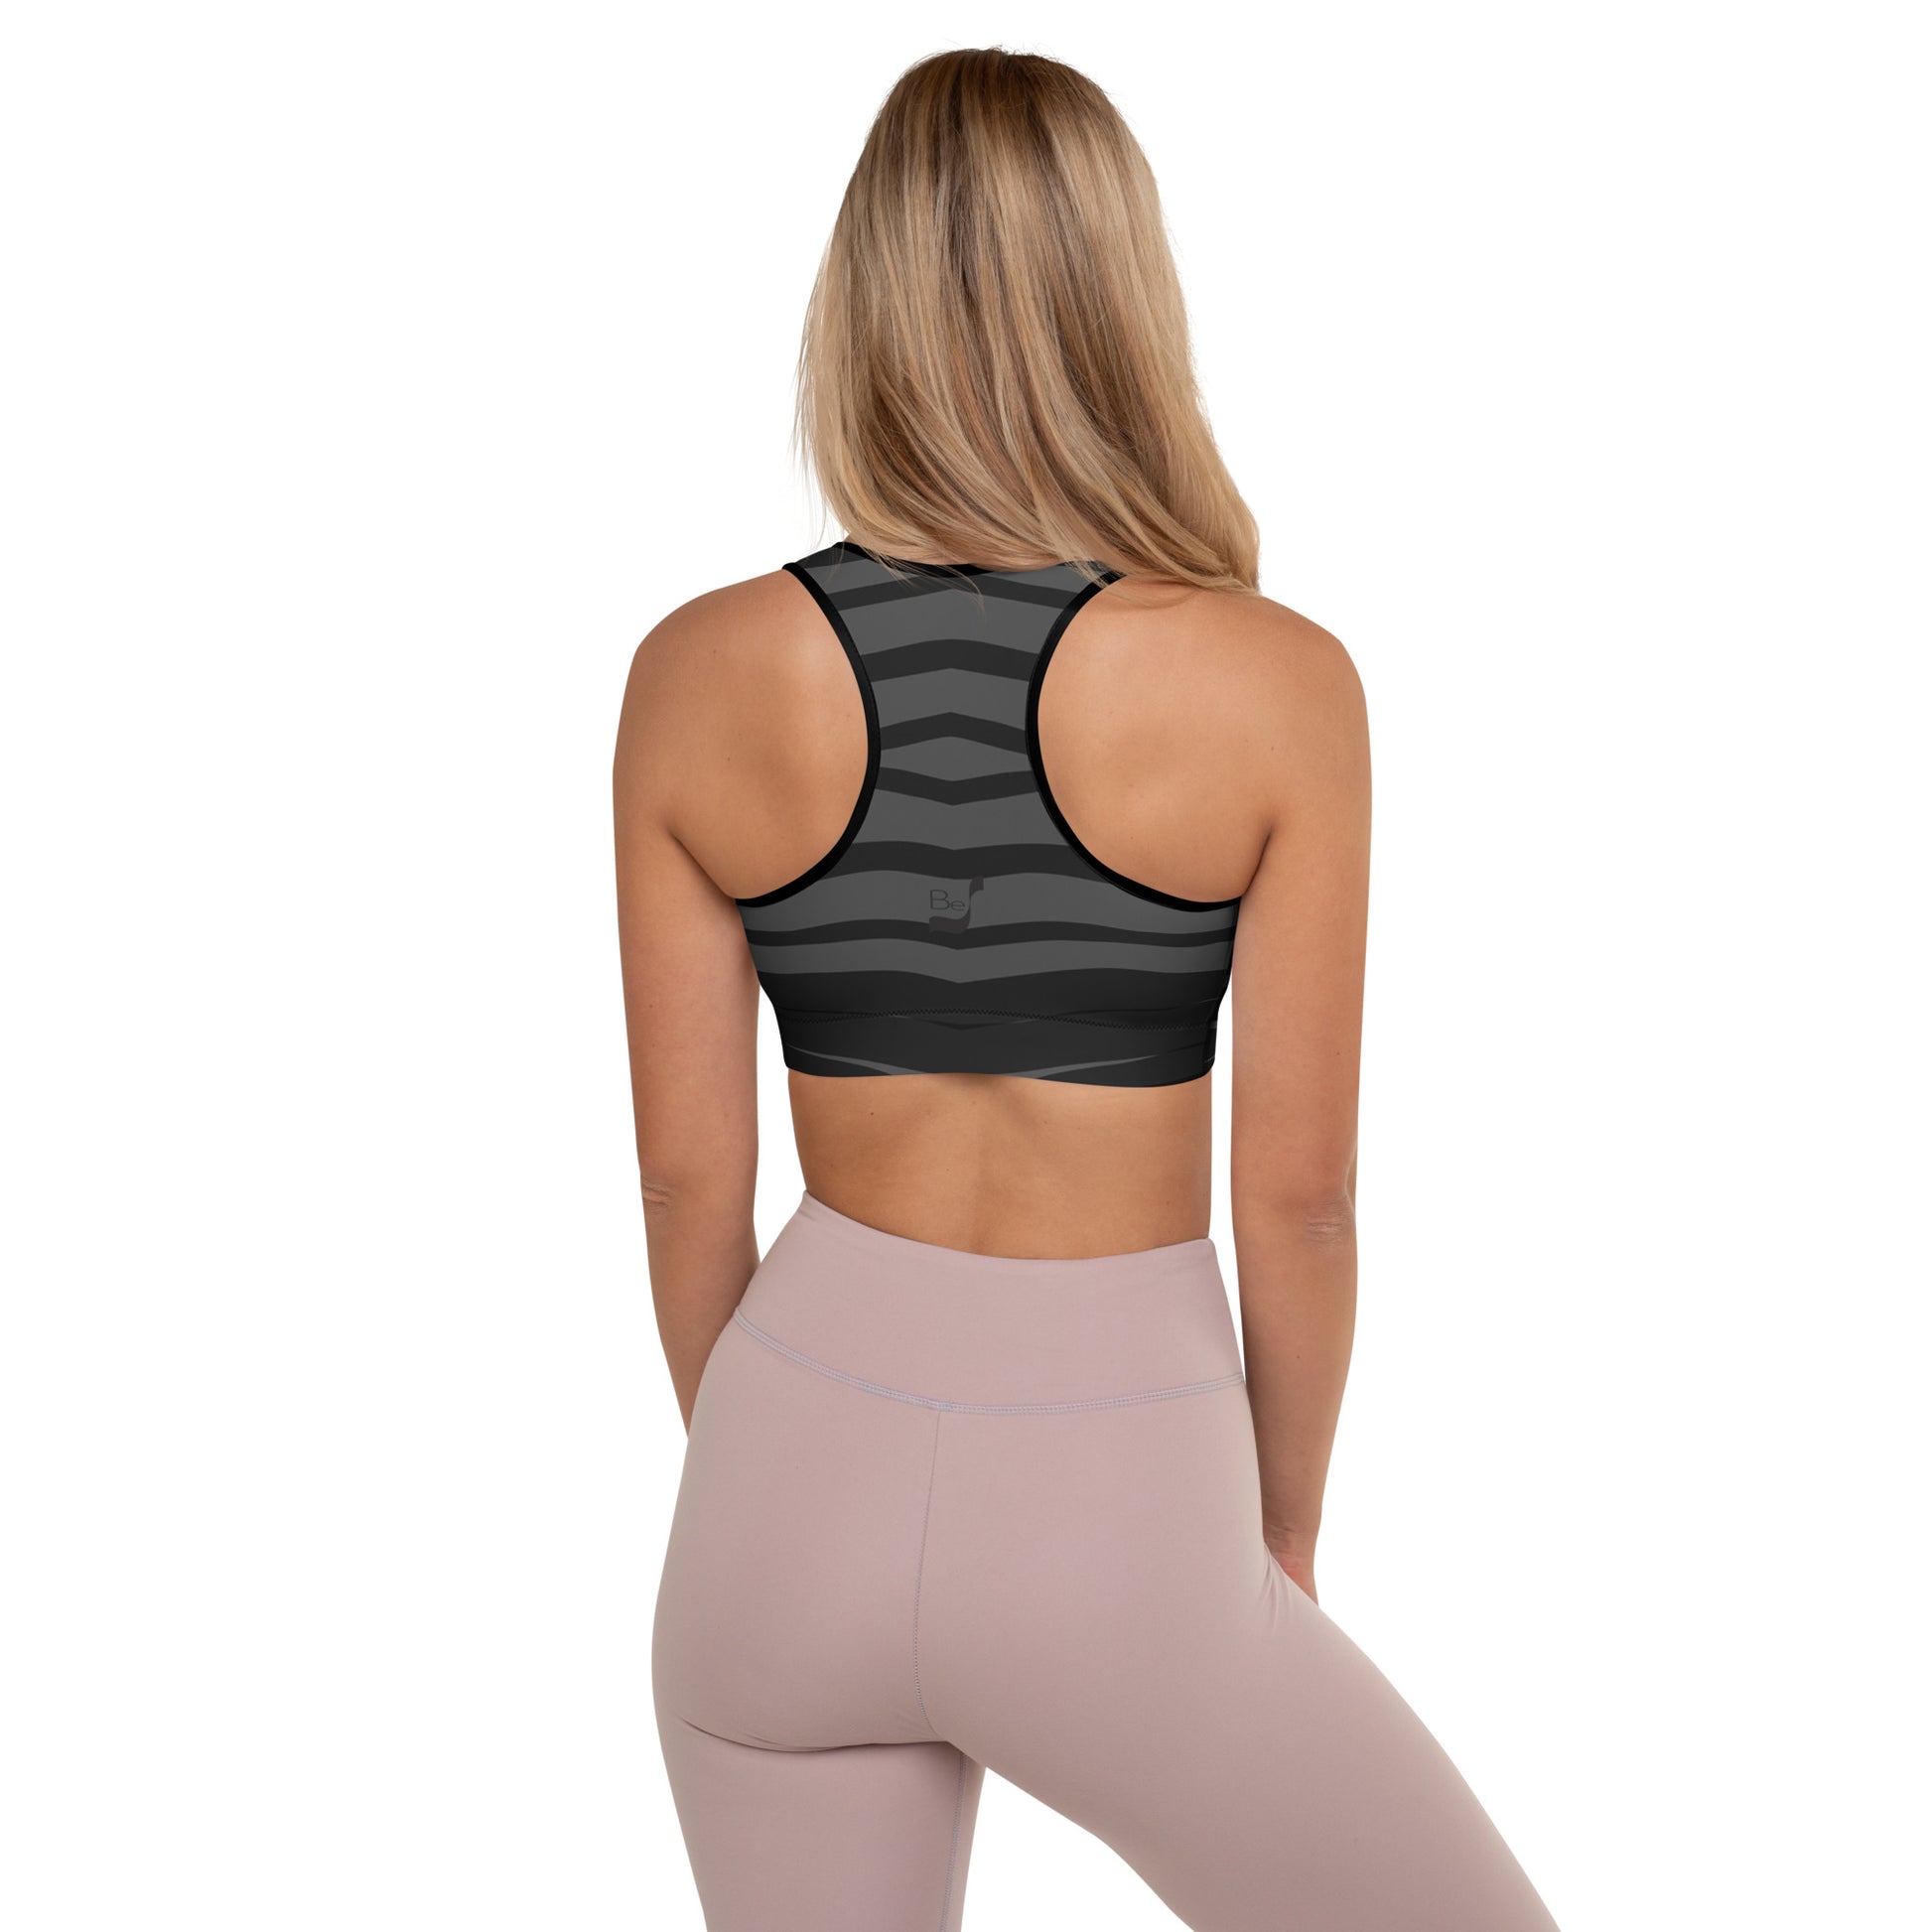 Introducing the Black H Stripes Rombo BeSculpt Women Padded Sports Bra—a chic and supportive addition to your activewear collection!